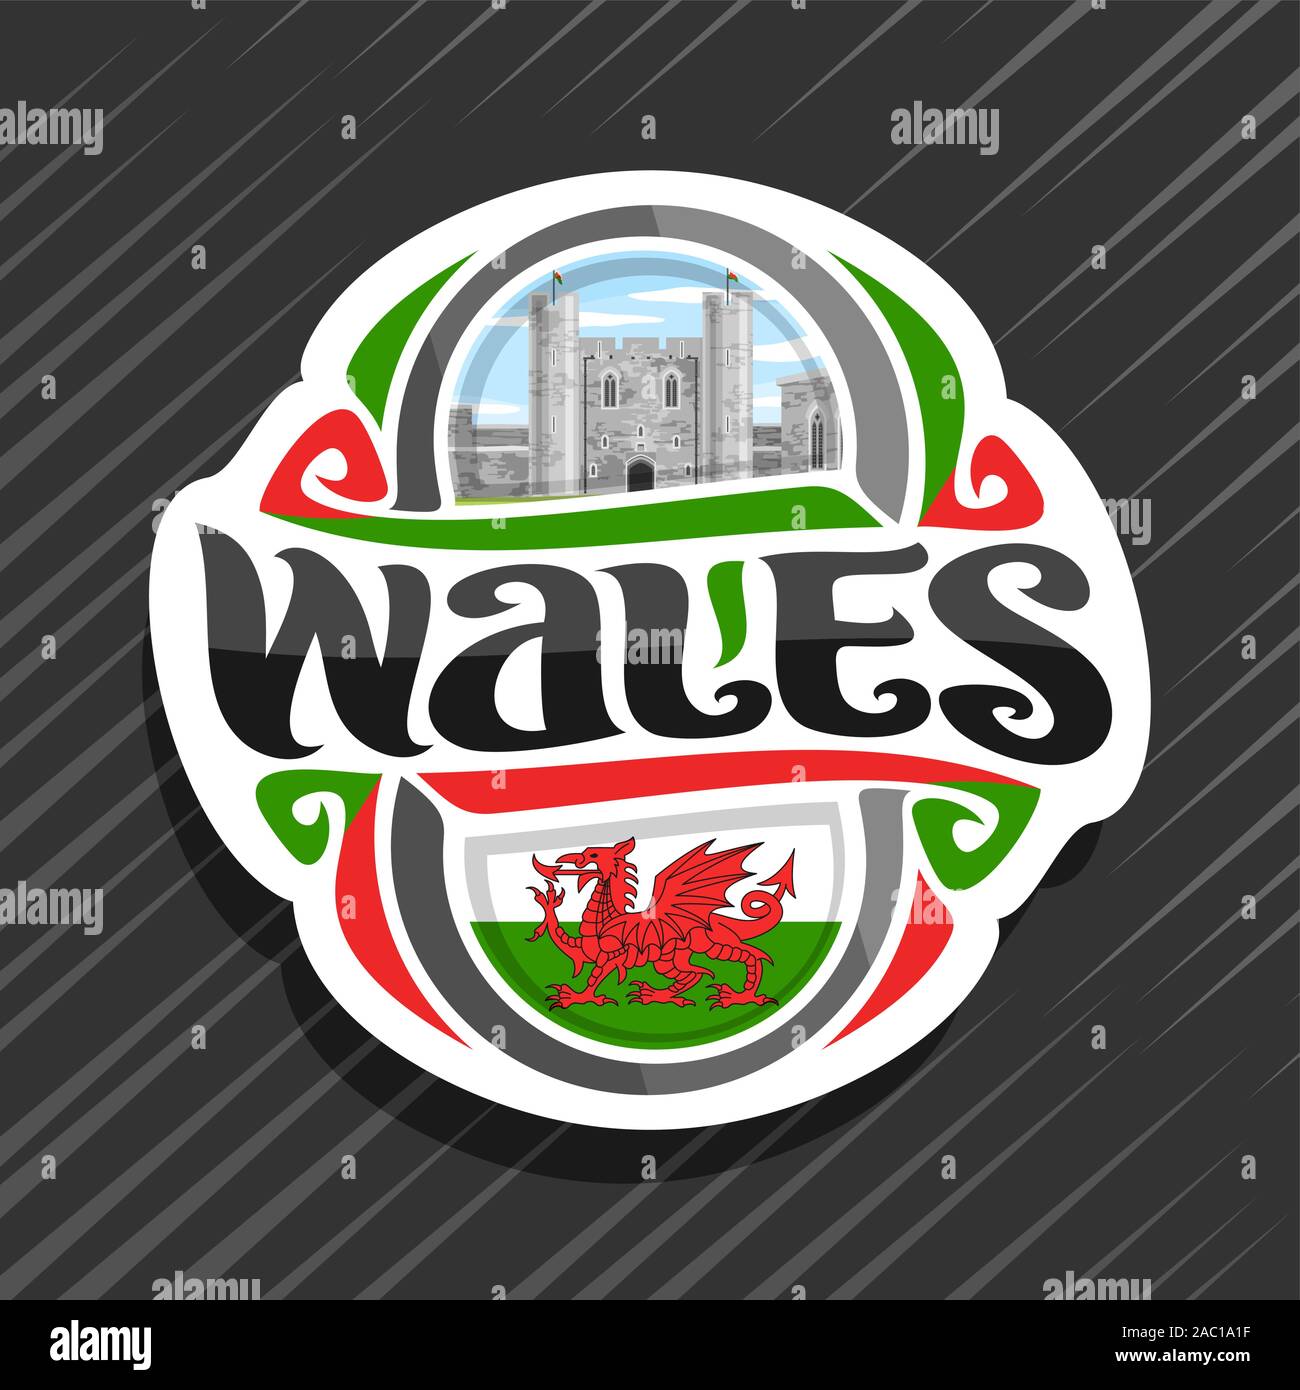 Vector logo for Wales, fridge magnet with welsh flag with red dragon, original brush typeface for word wales and national welsh symbol - Caerphilly ca Stock Vector